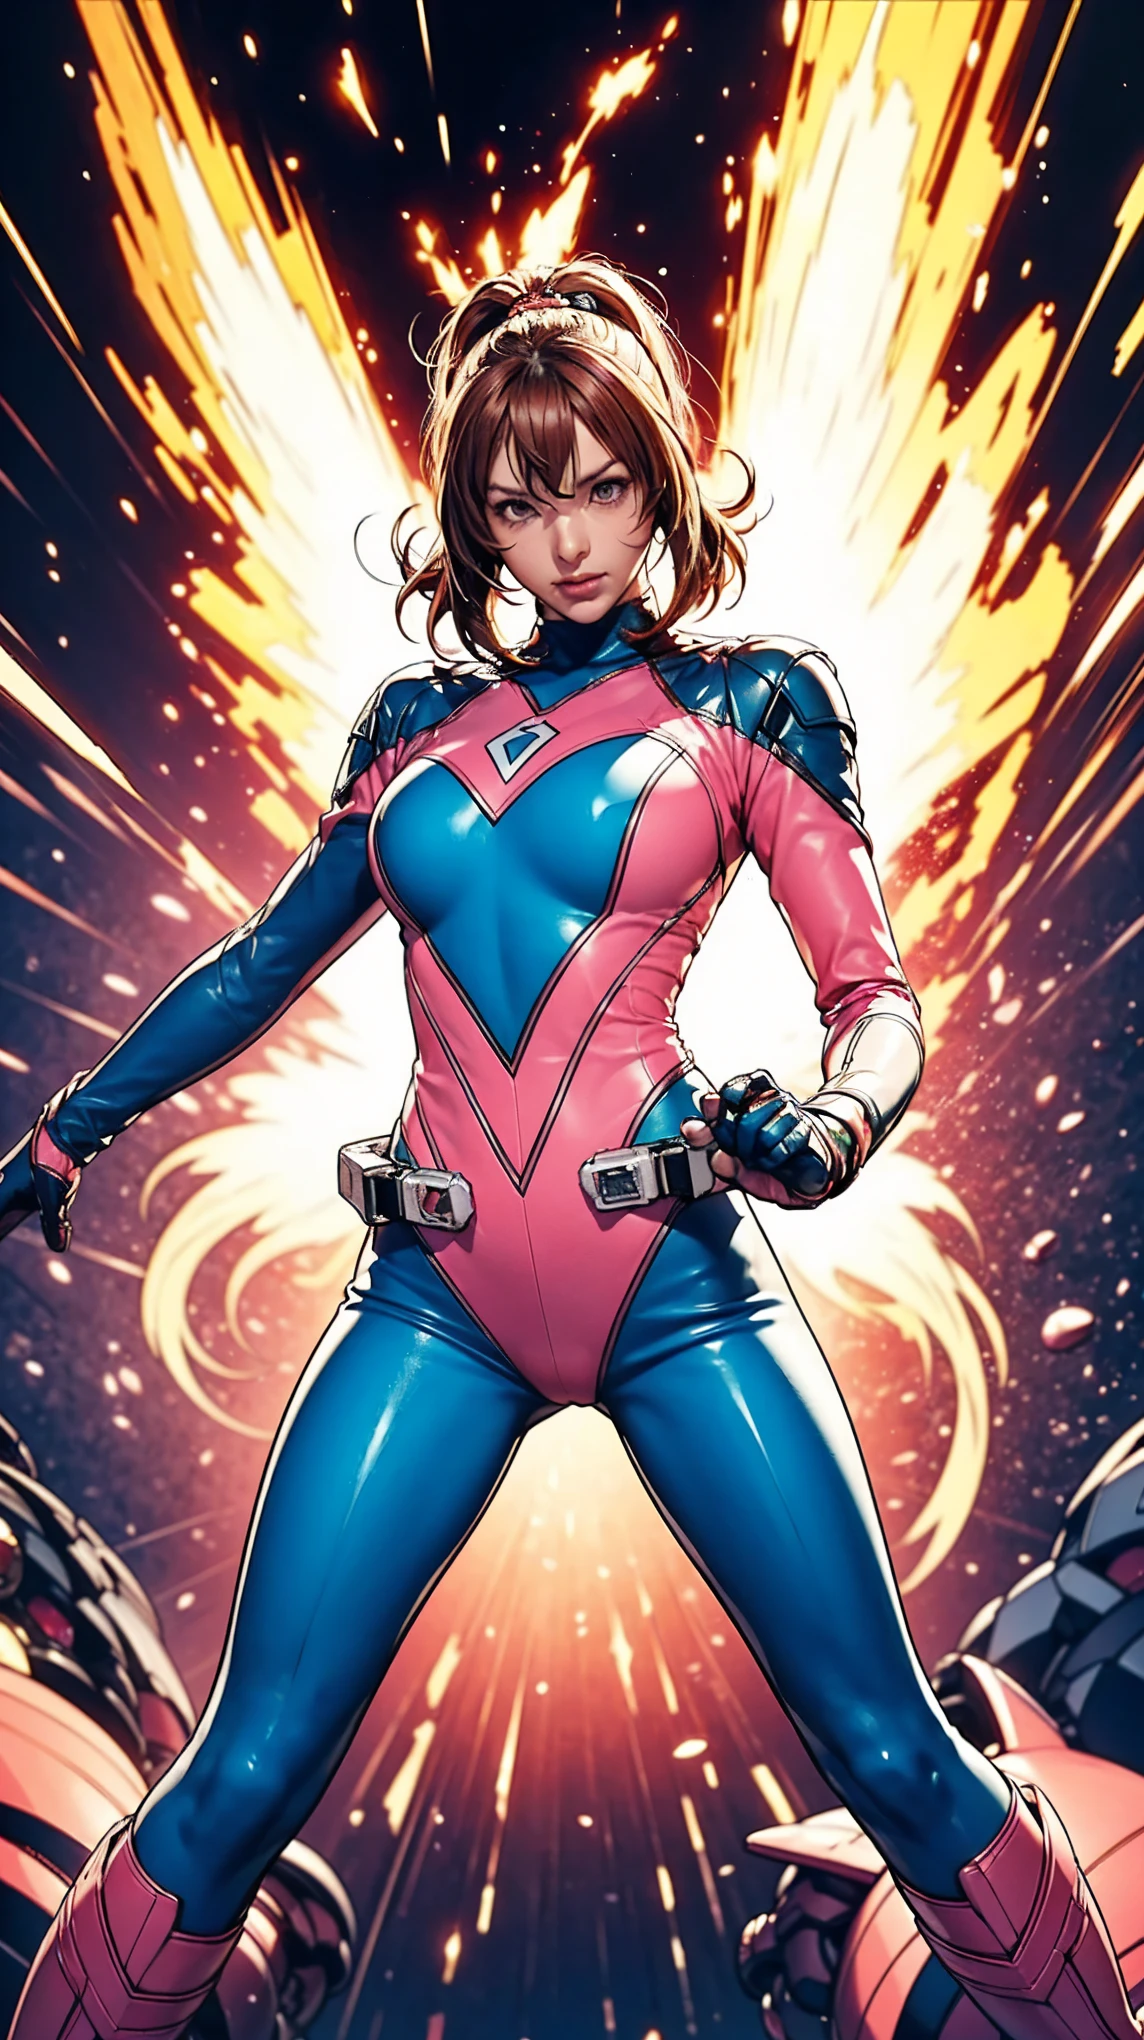 Solo, A brave and courageous image of a 6 member ranger team, Each one is decorated in vibrant colors such as:: ((Pink)), red is front of center, violet, Green, yellow, blue black, white,. Dynamic poses in a background that exudes energy and courage, neon, fire, plasma, Fluorescent, shocking, pink big bomber, splashing pink, running, fighting pose, action pose, Embodying the essence of the classic Sentai superhero team. Each Ranger:: The attire is sophisticated and modern, Each color has elements that reflect its theme., Ready for action. ((Camel Toe)), weapons, in sunset background , in cinematic lighting, cover art mixed cinema poster style,